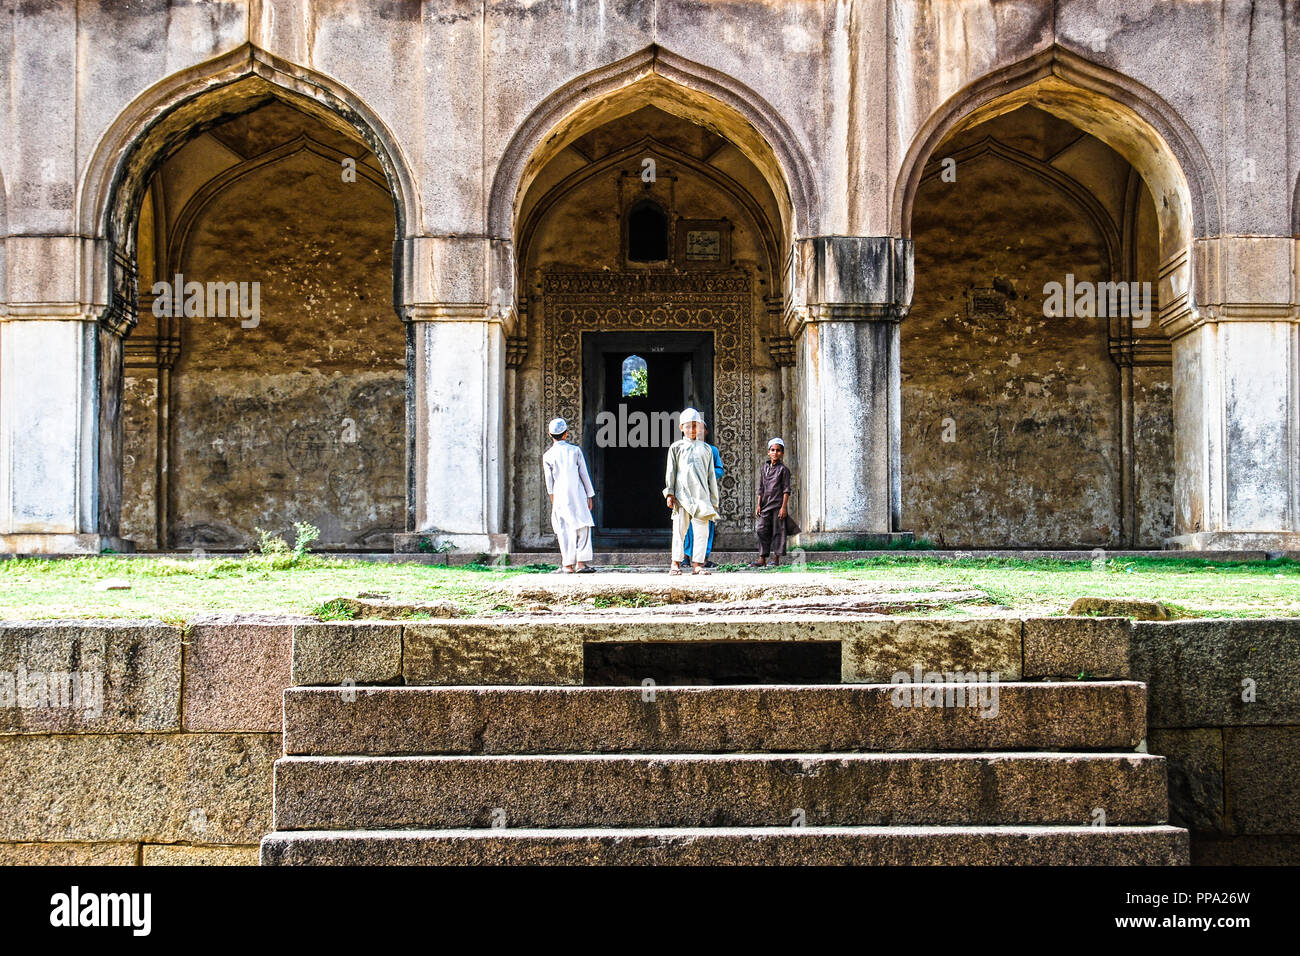 Traditionally dressed young Muslim boys exploring Qutb Shahi Tombs. Hyderabad, India - July 10, 2014 Stock Photo